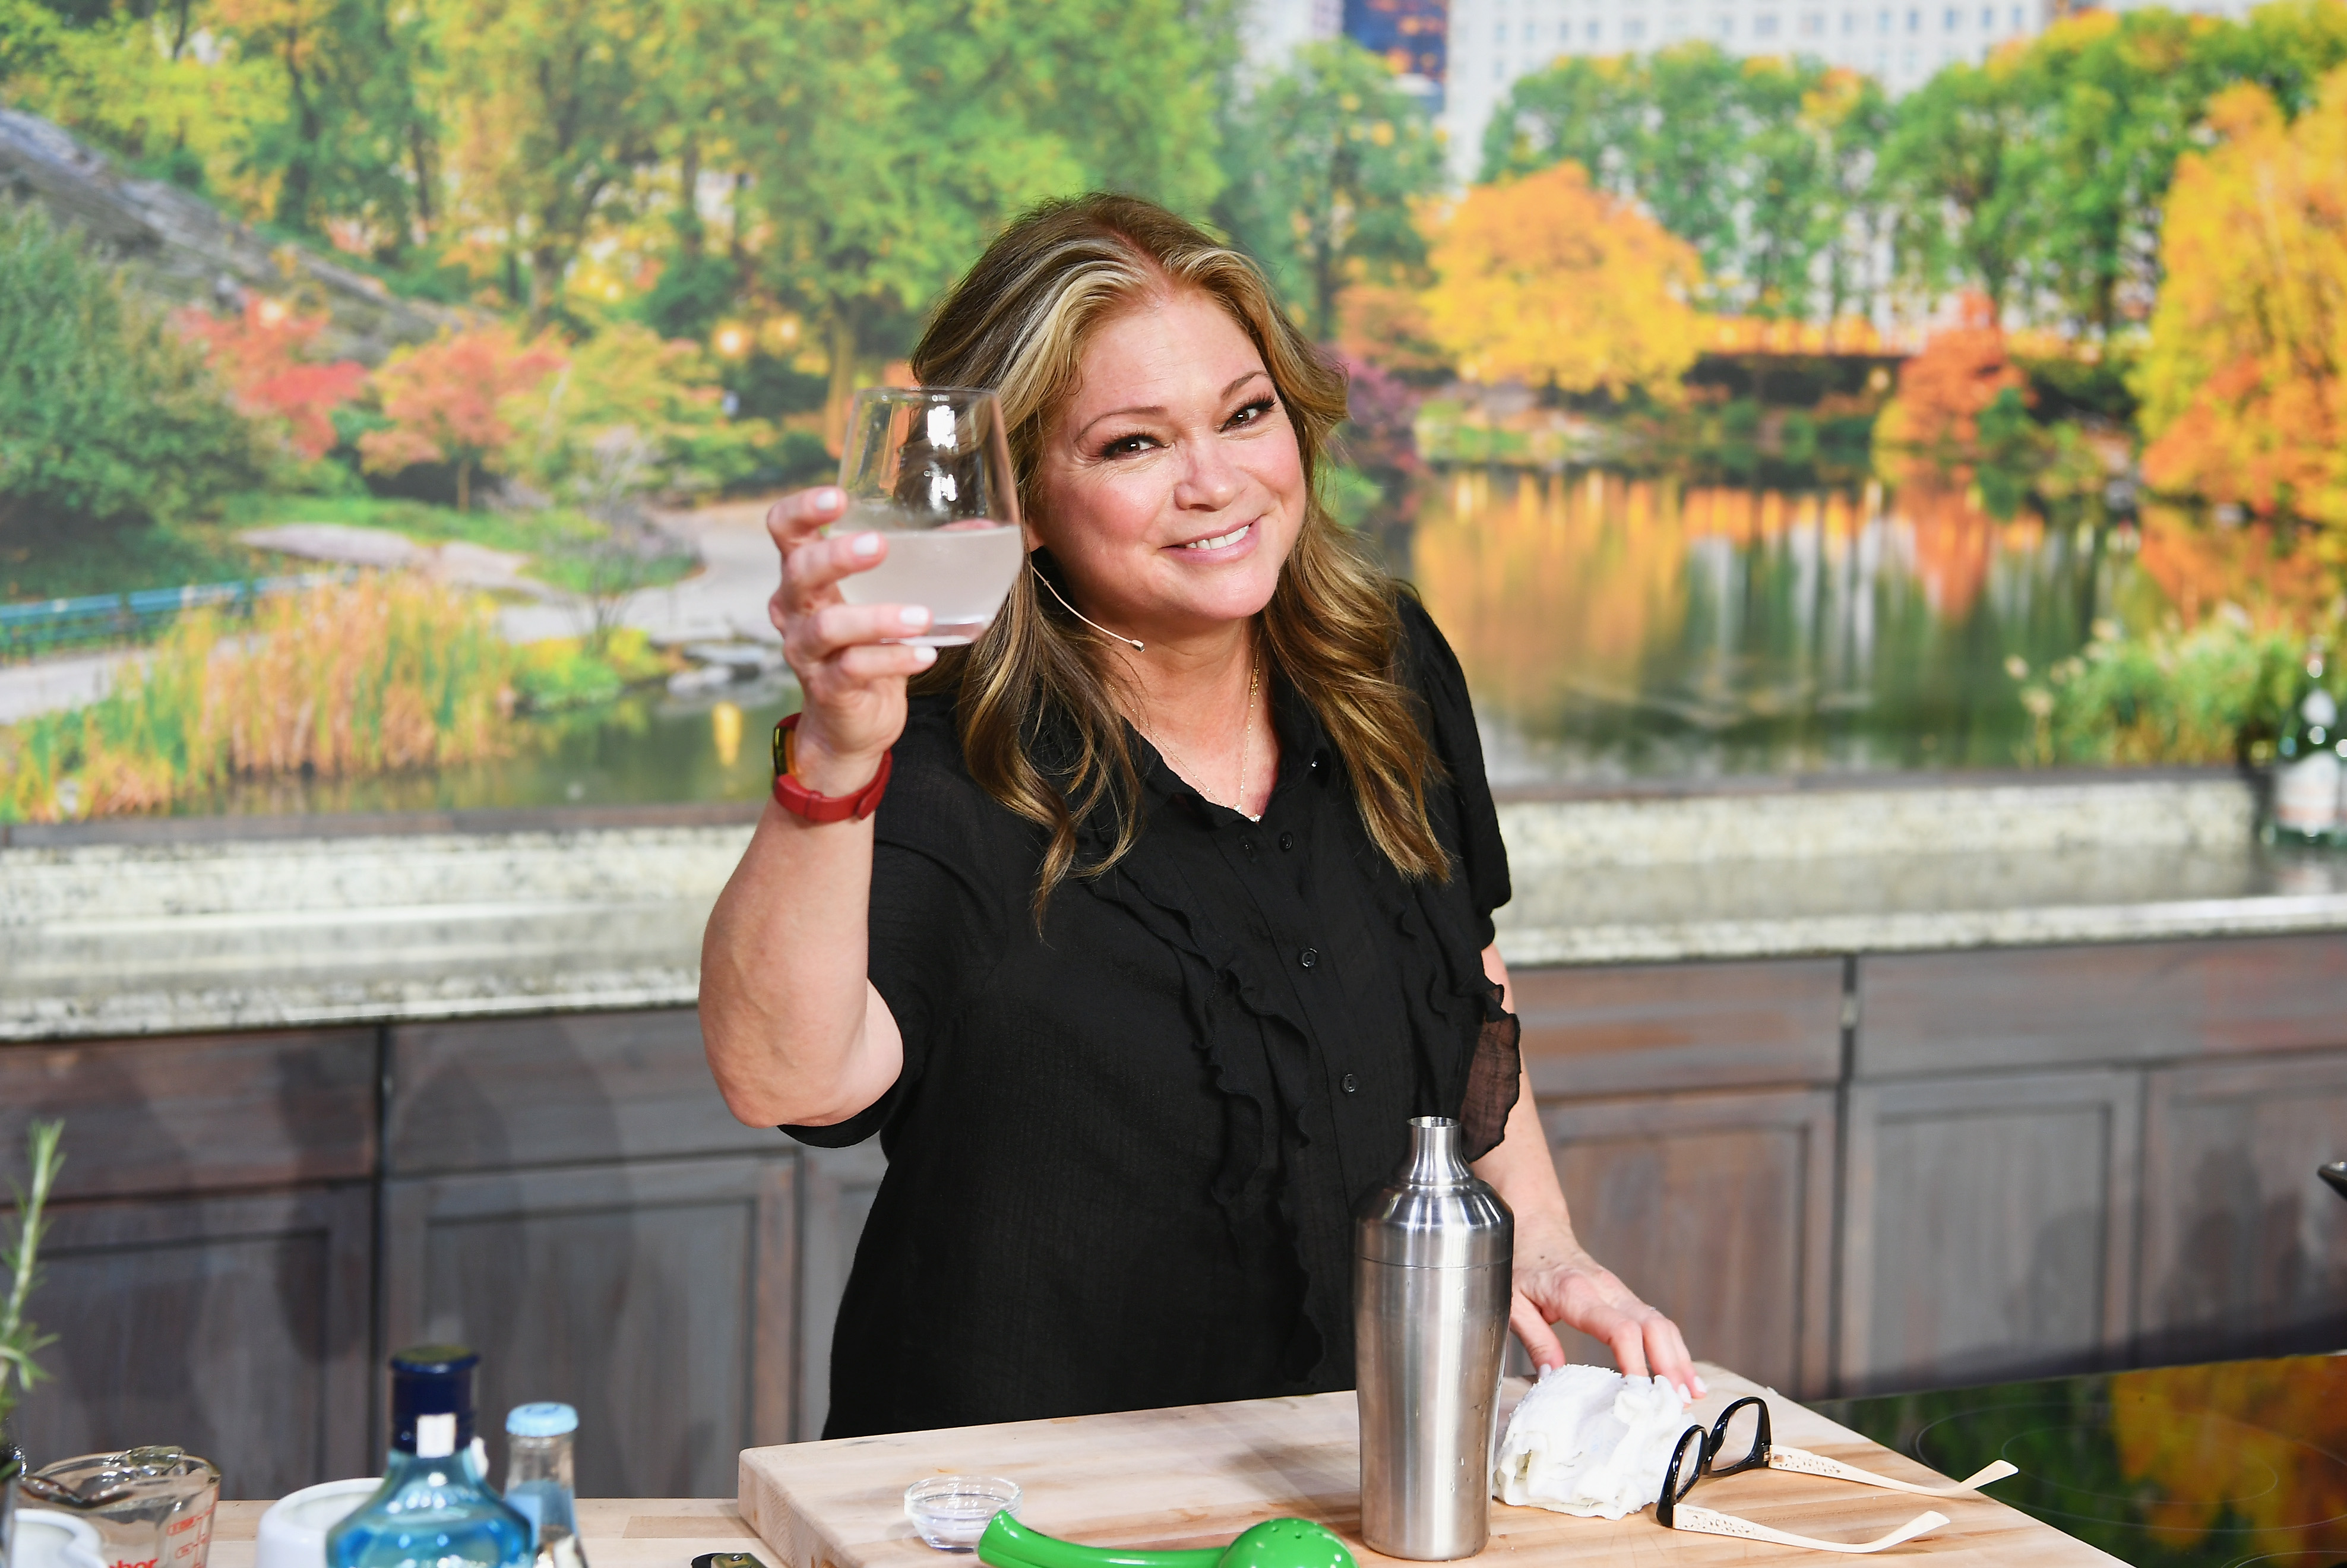 Valerie Bertinelli raises a glass to the camera in this photograph.